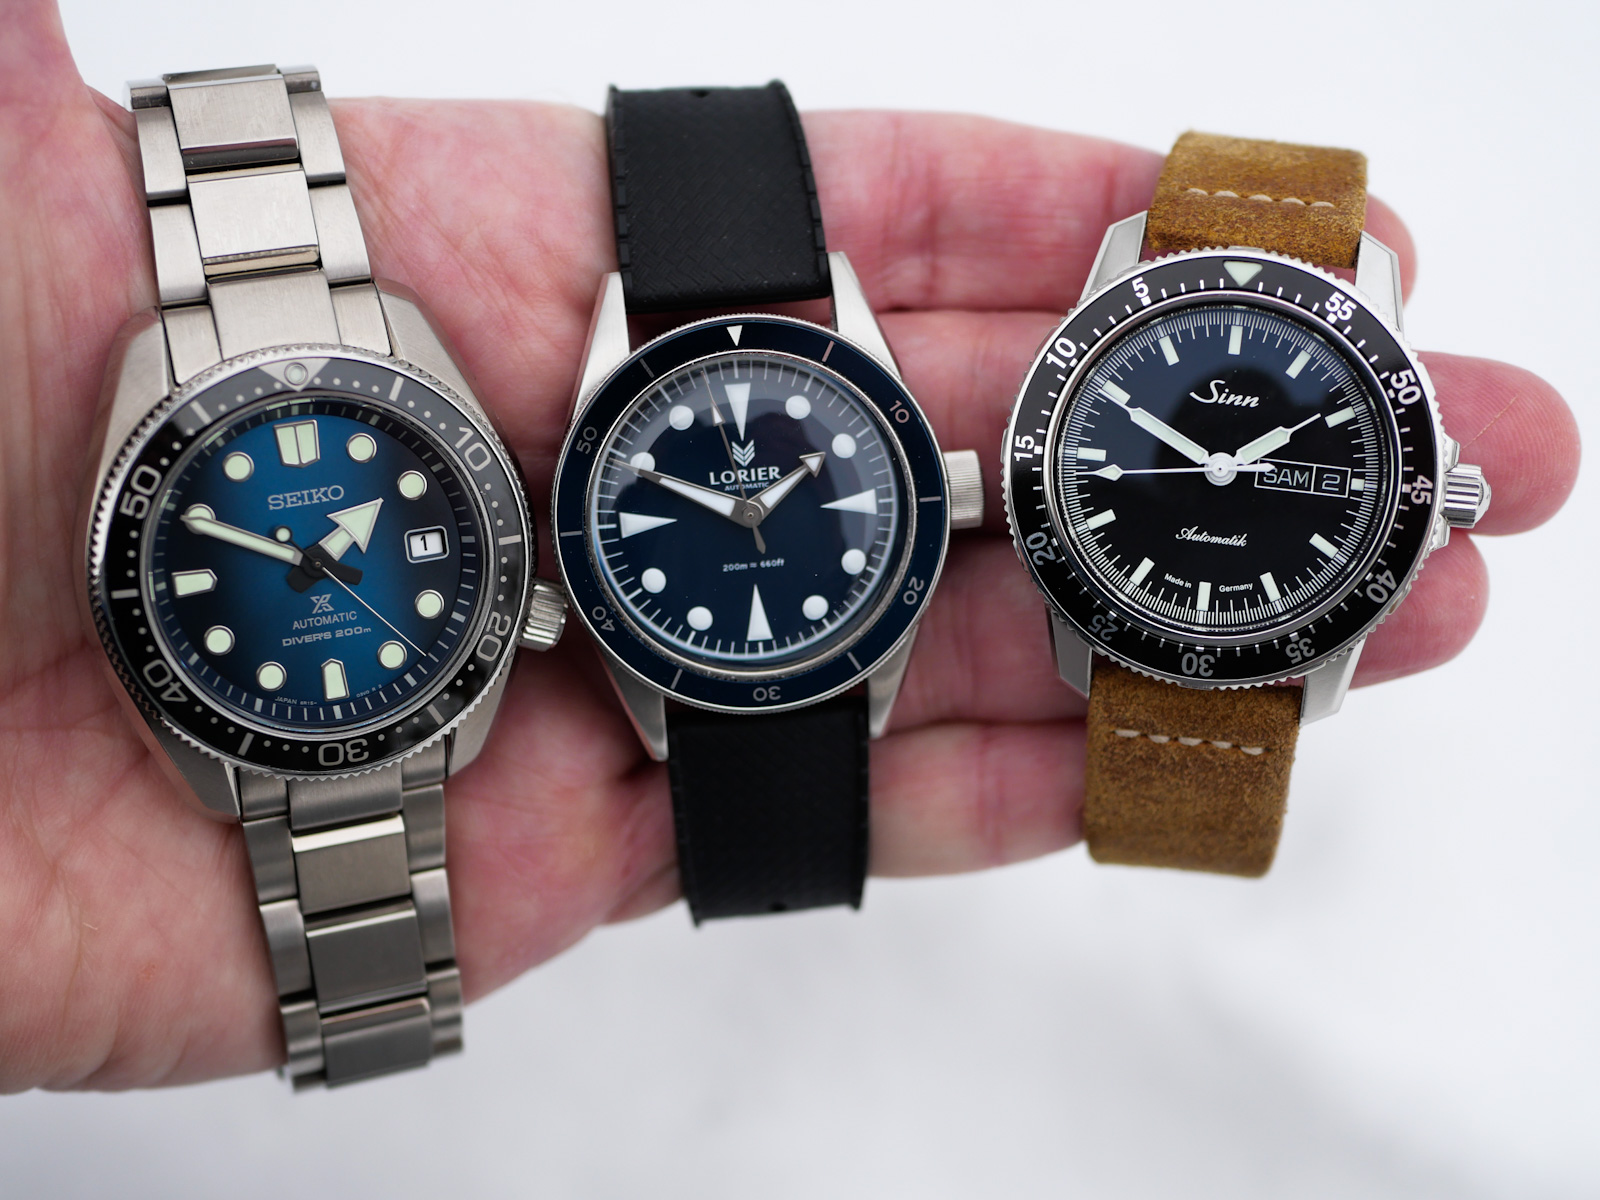 The watches I wore the most in 2020: The Seiko Prospex SPB083J1, Sinn 104  and Lorier Neptune - Time and Tide Watches